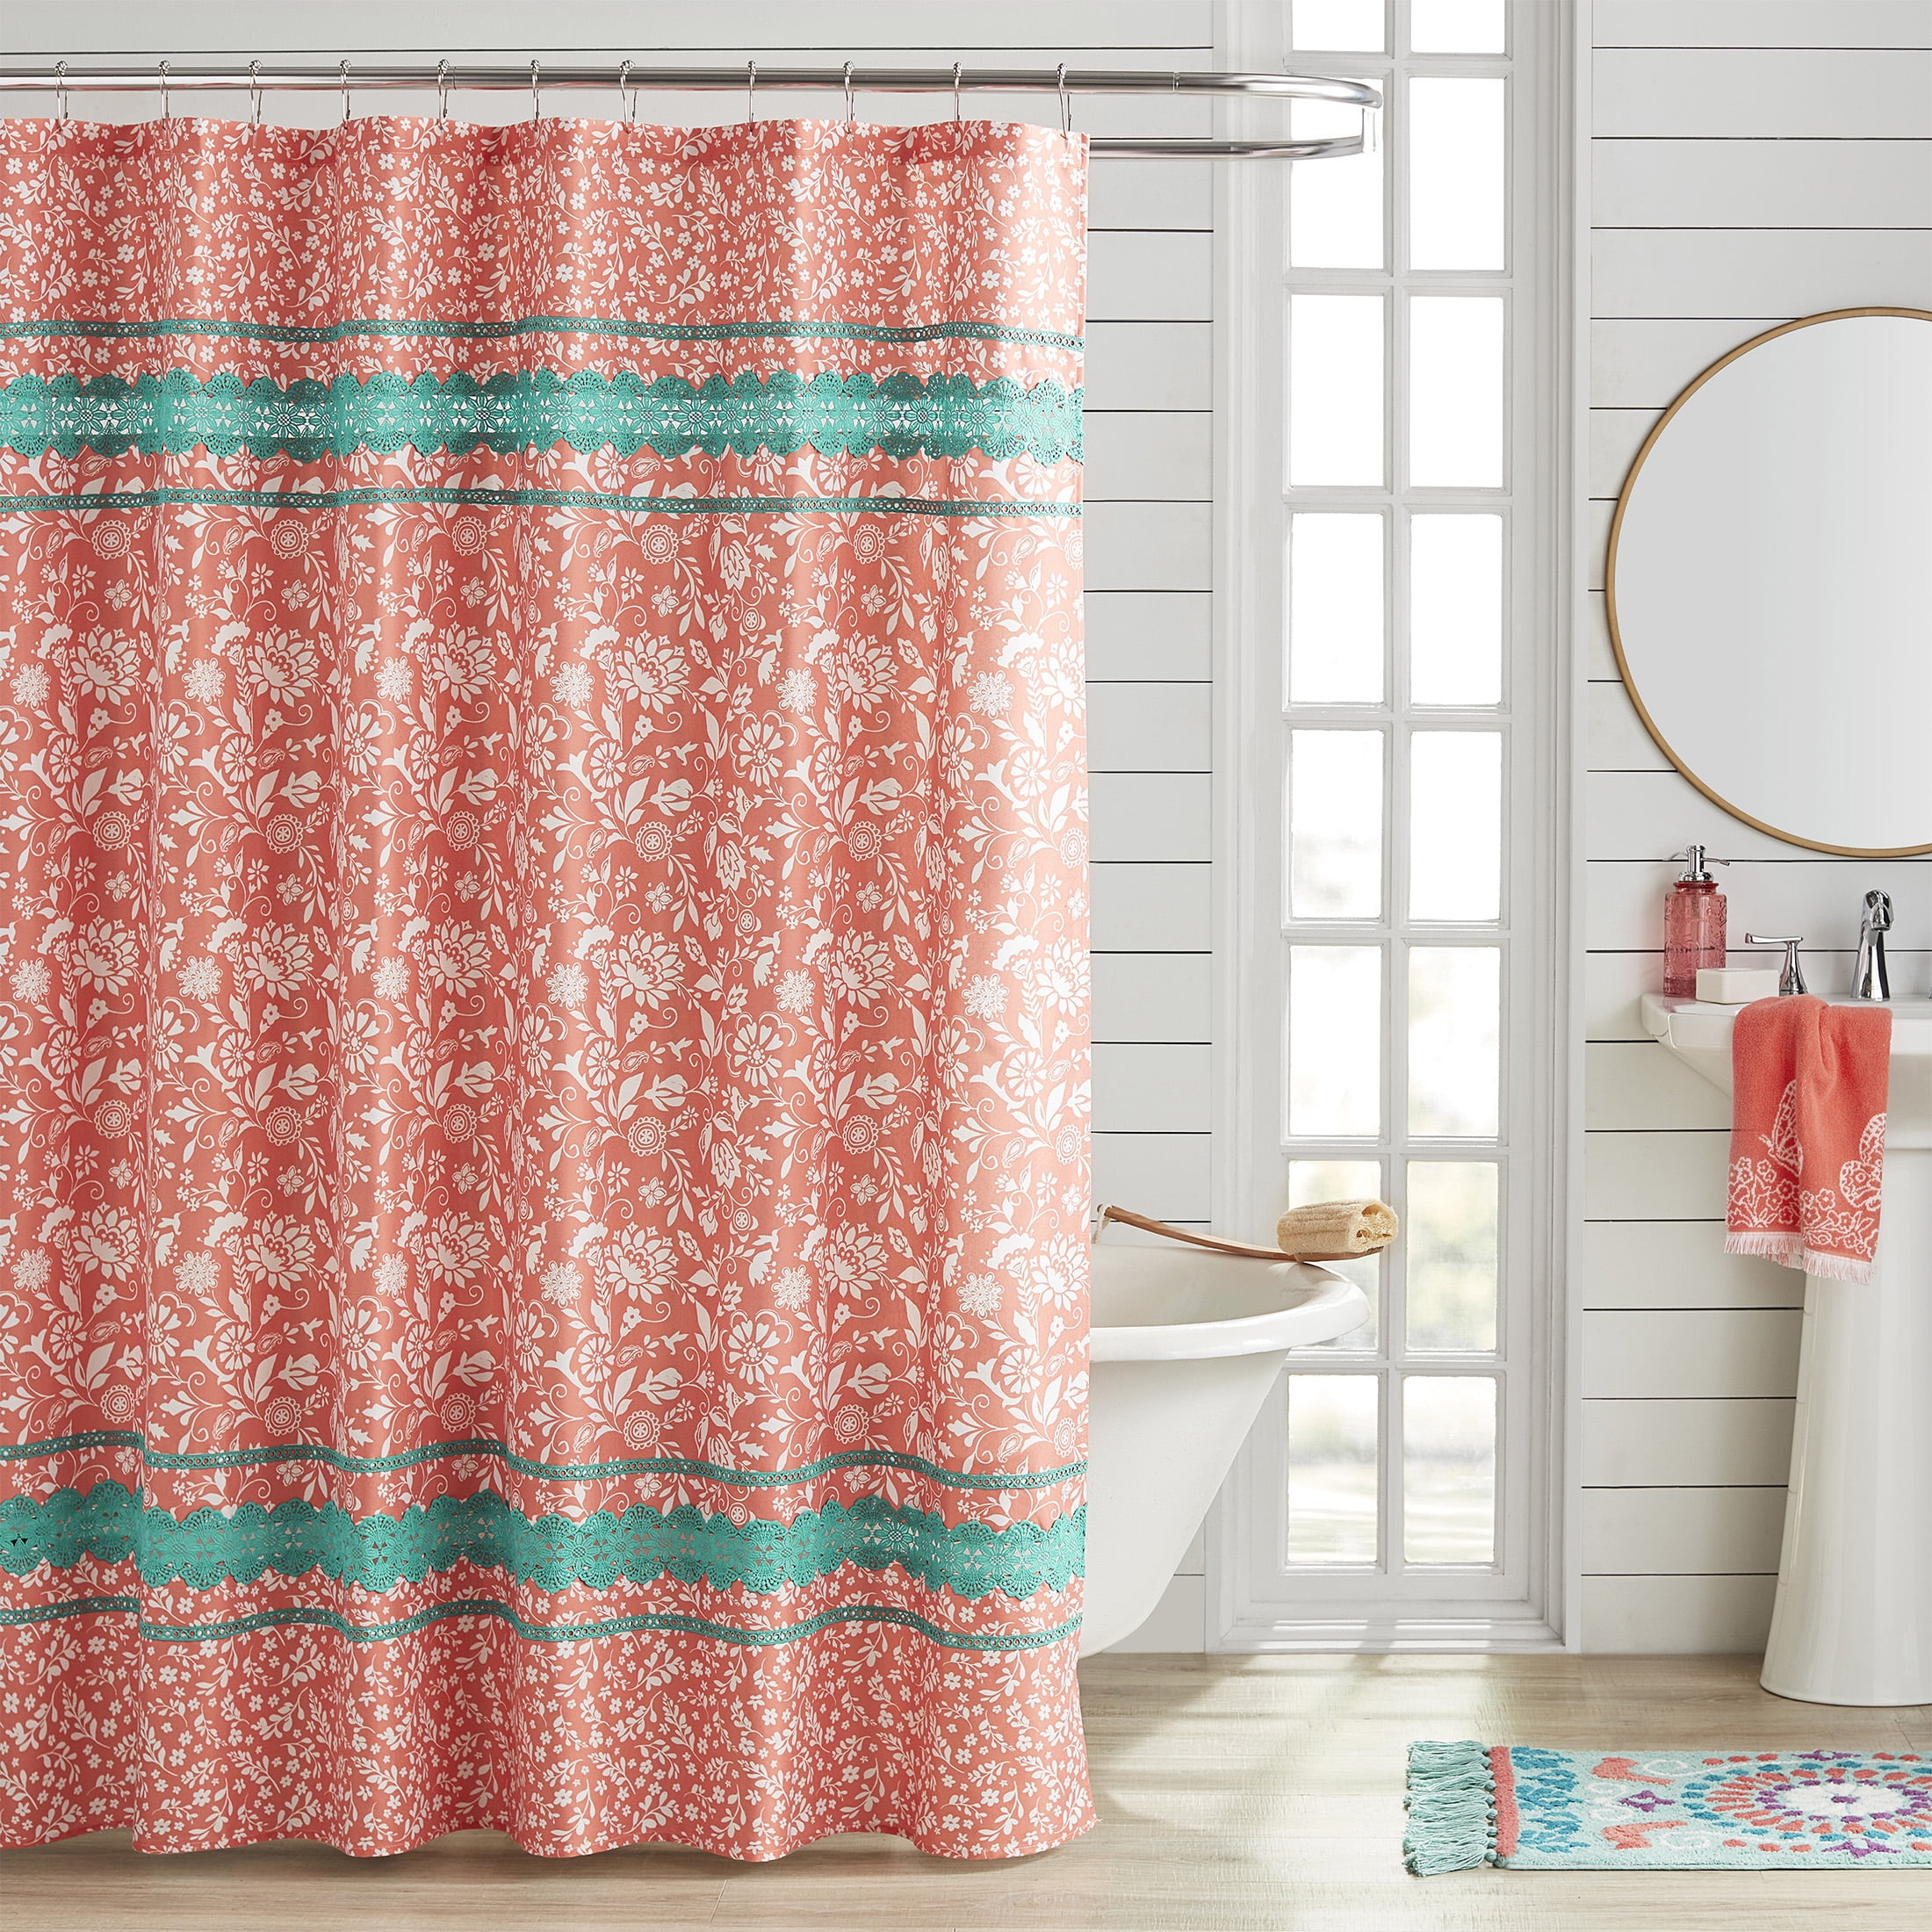 Red Flowers Shower Curtain Floral Print Fabric Bathroom Decor with Hooks 72"x72" 